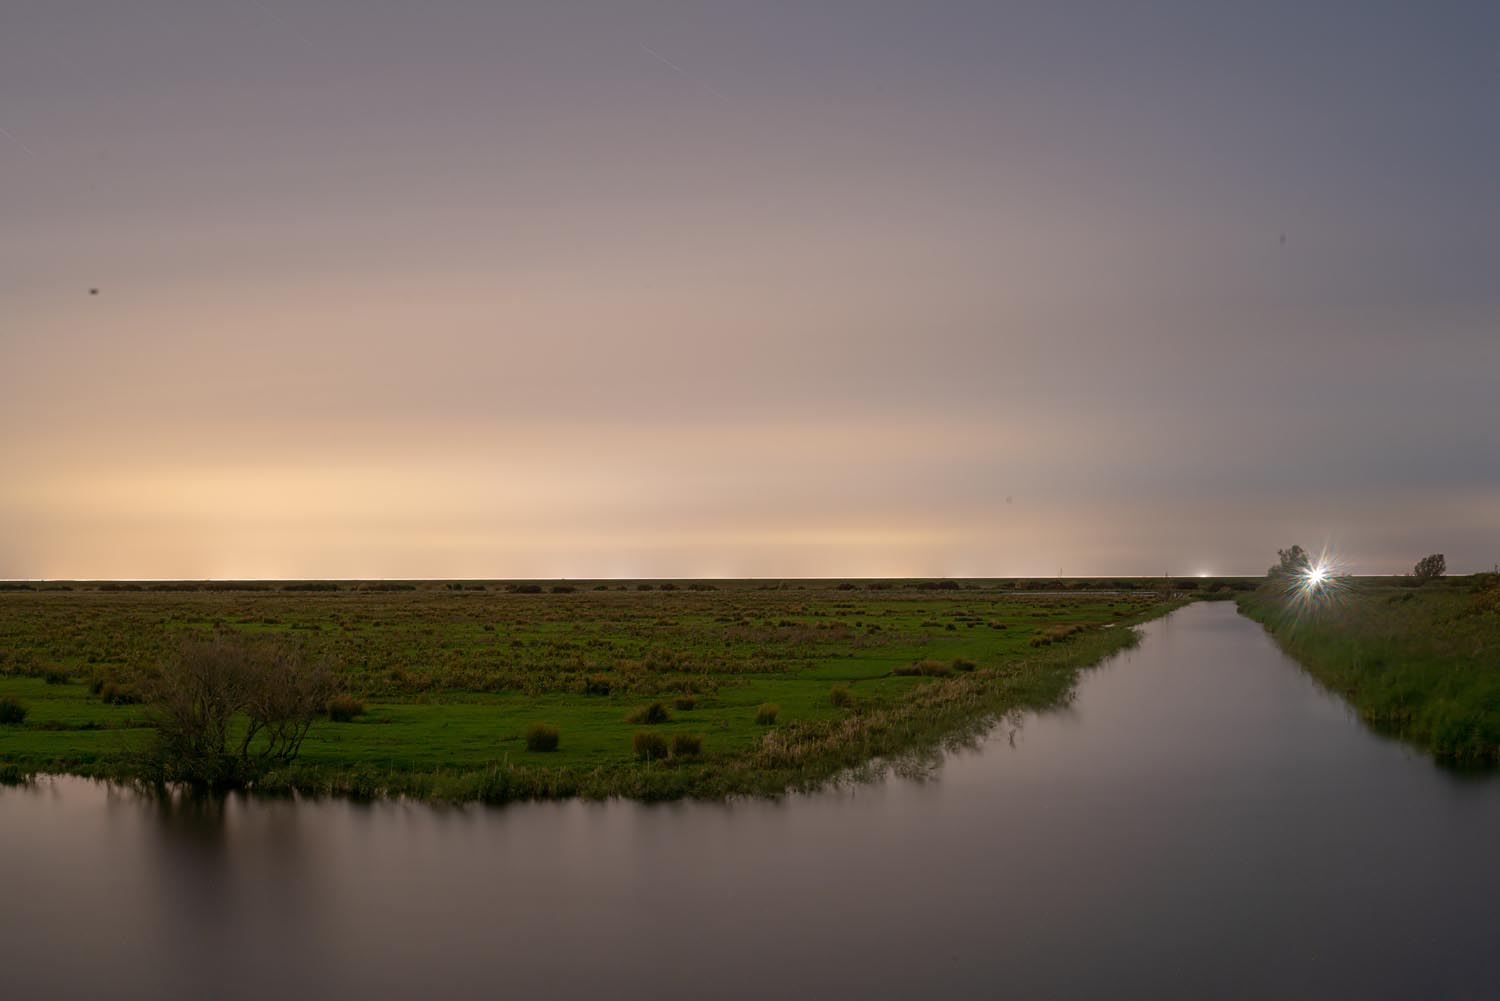 Sites at Risk of Climate Change: Night Landscape Photographs in The Netherlands, Steve Giovinco, Canal, Nieuw Land National Park, Clear Night, with Car Light Flevoland